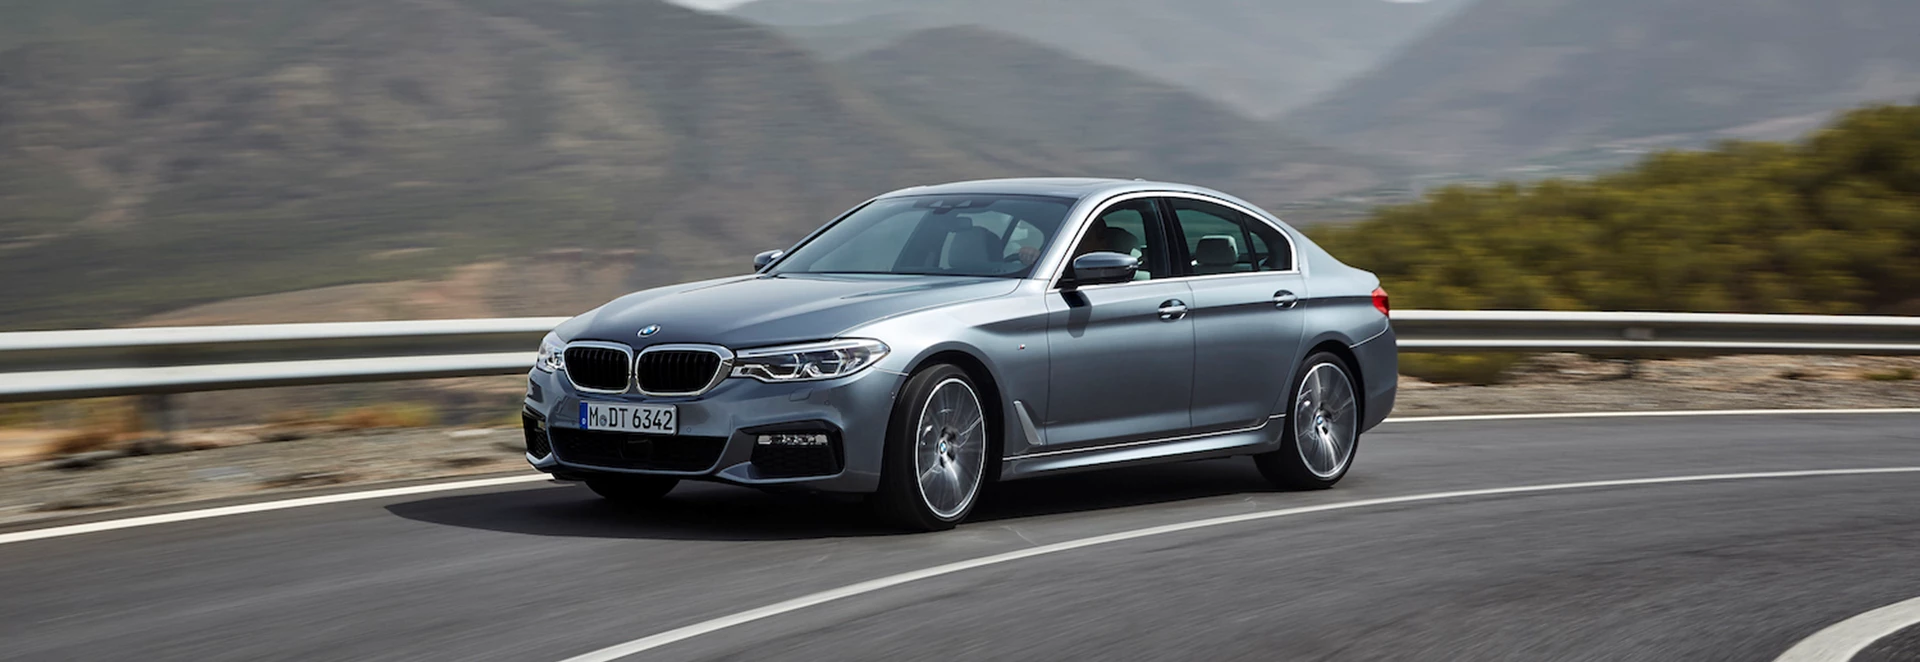 Buyer’s Guide to the BMW 5 Series